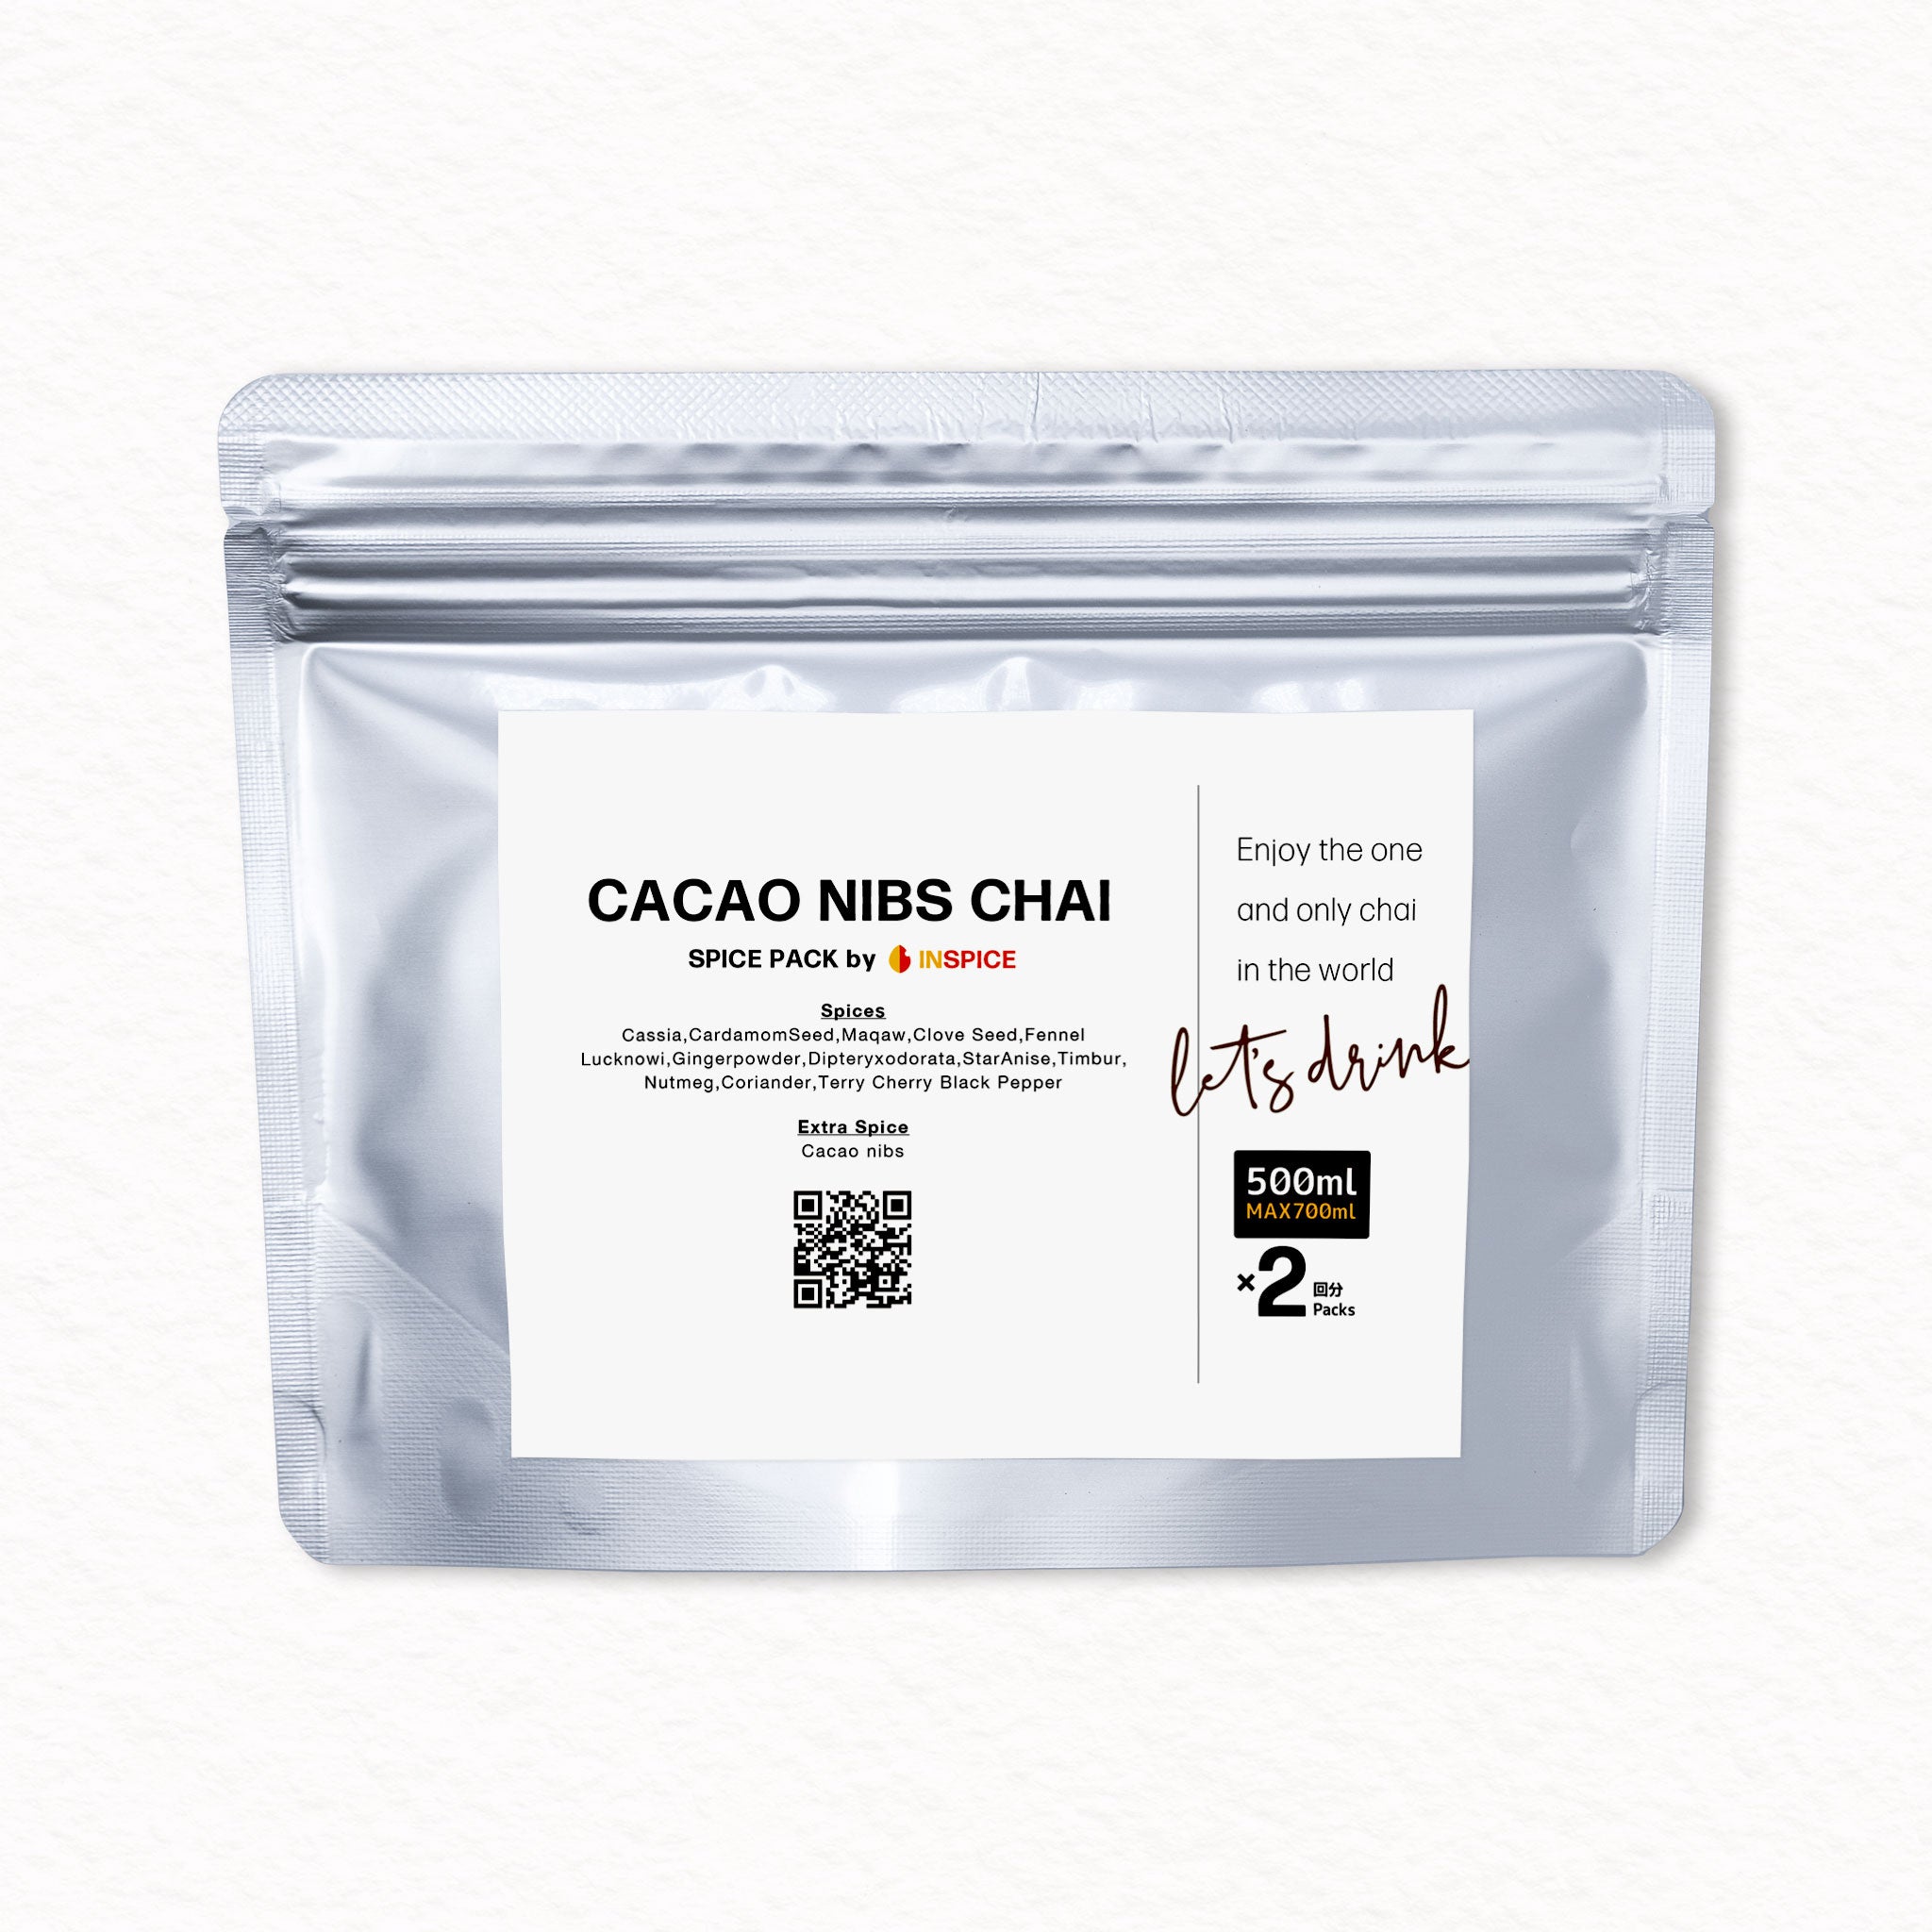 INSPICE CACAO NIBS CHAI SPICE PACK「カカオニブチャイ スパイス ...